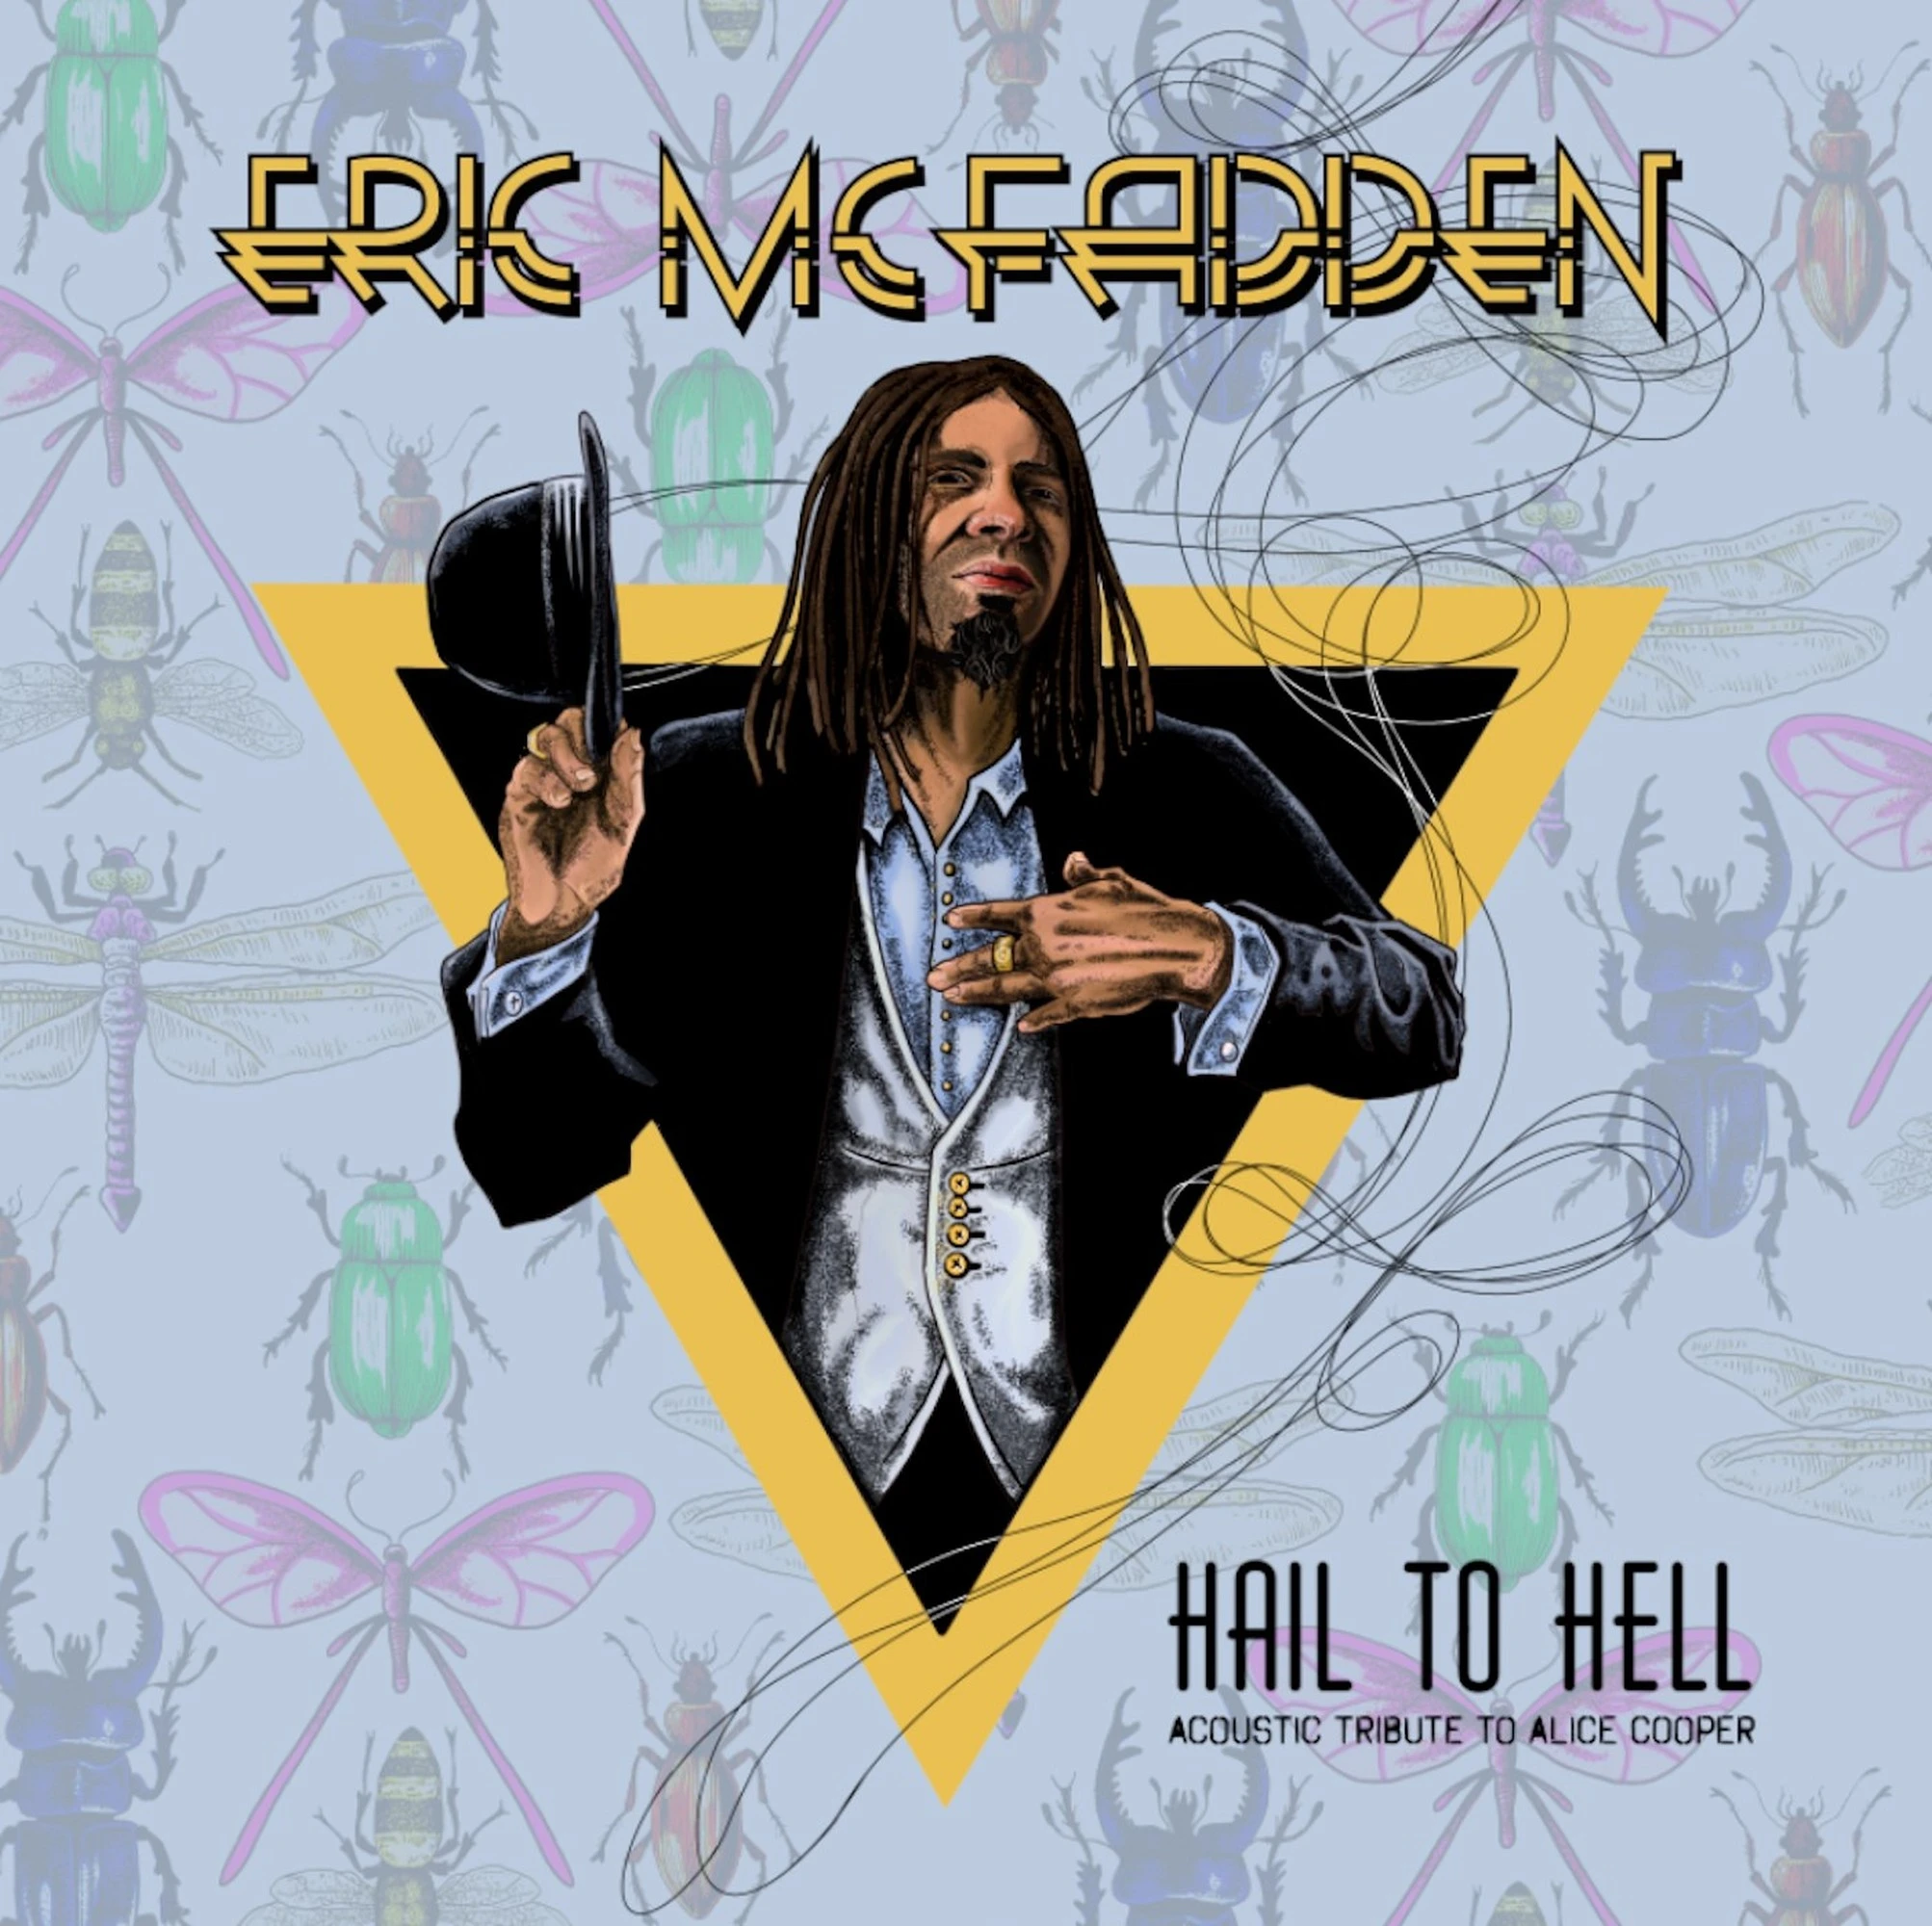 Eric McFadden - Hail To Hell (An Acoustic Tribute To Alice Cooper)